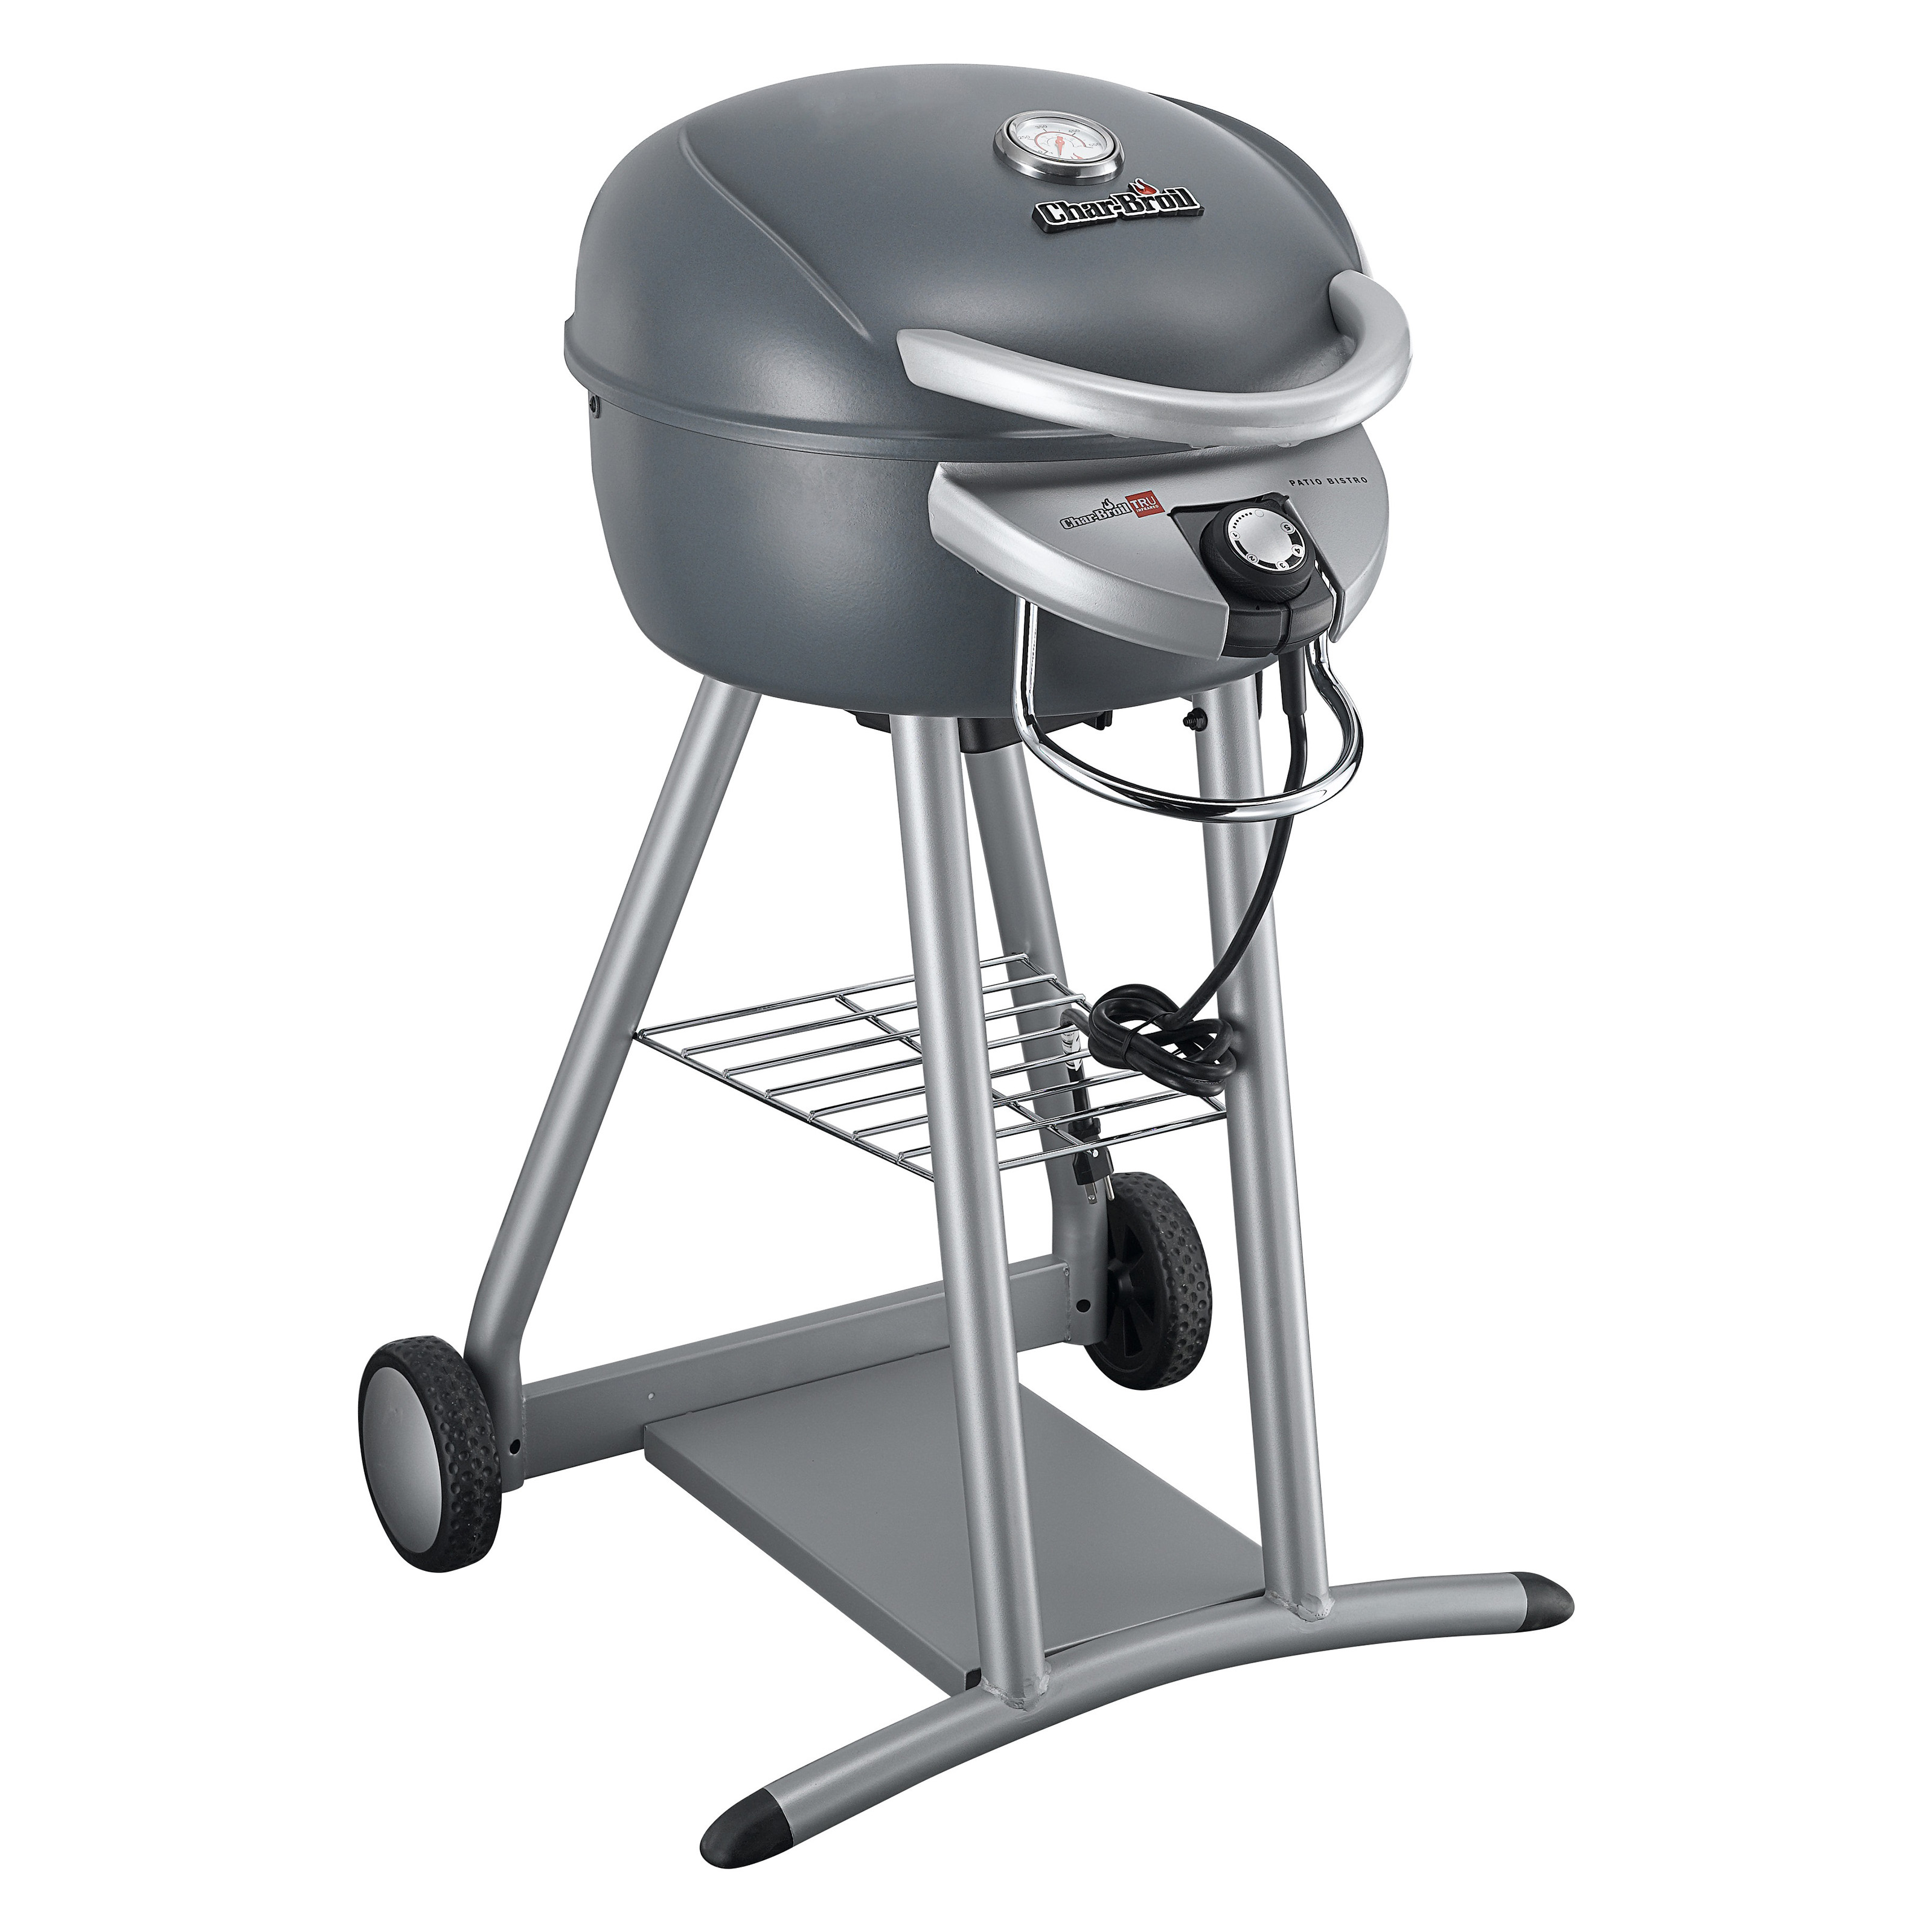 Char-Broil Patio Bistro 240 TRU Infrared Electric Grill, Graphite | 12601559 - image 1 of 2